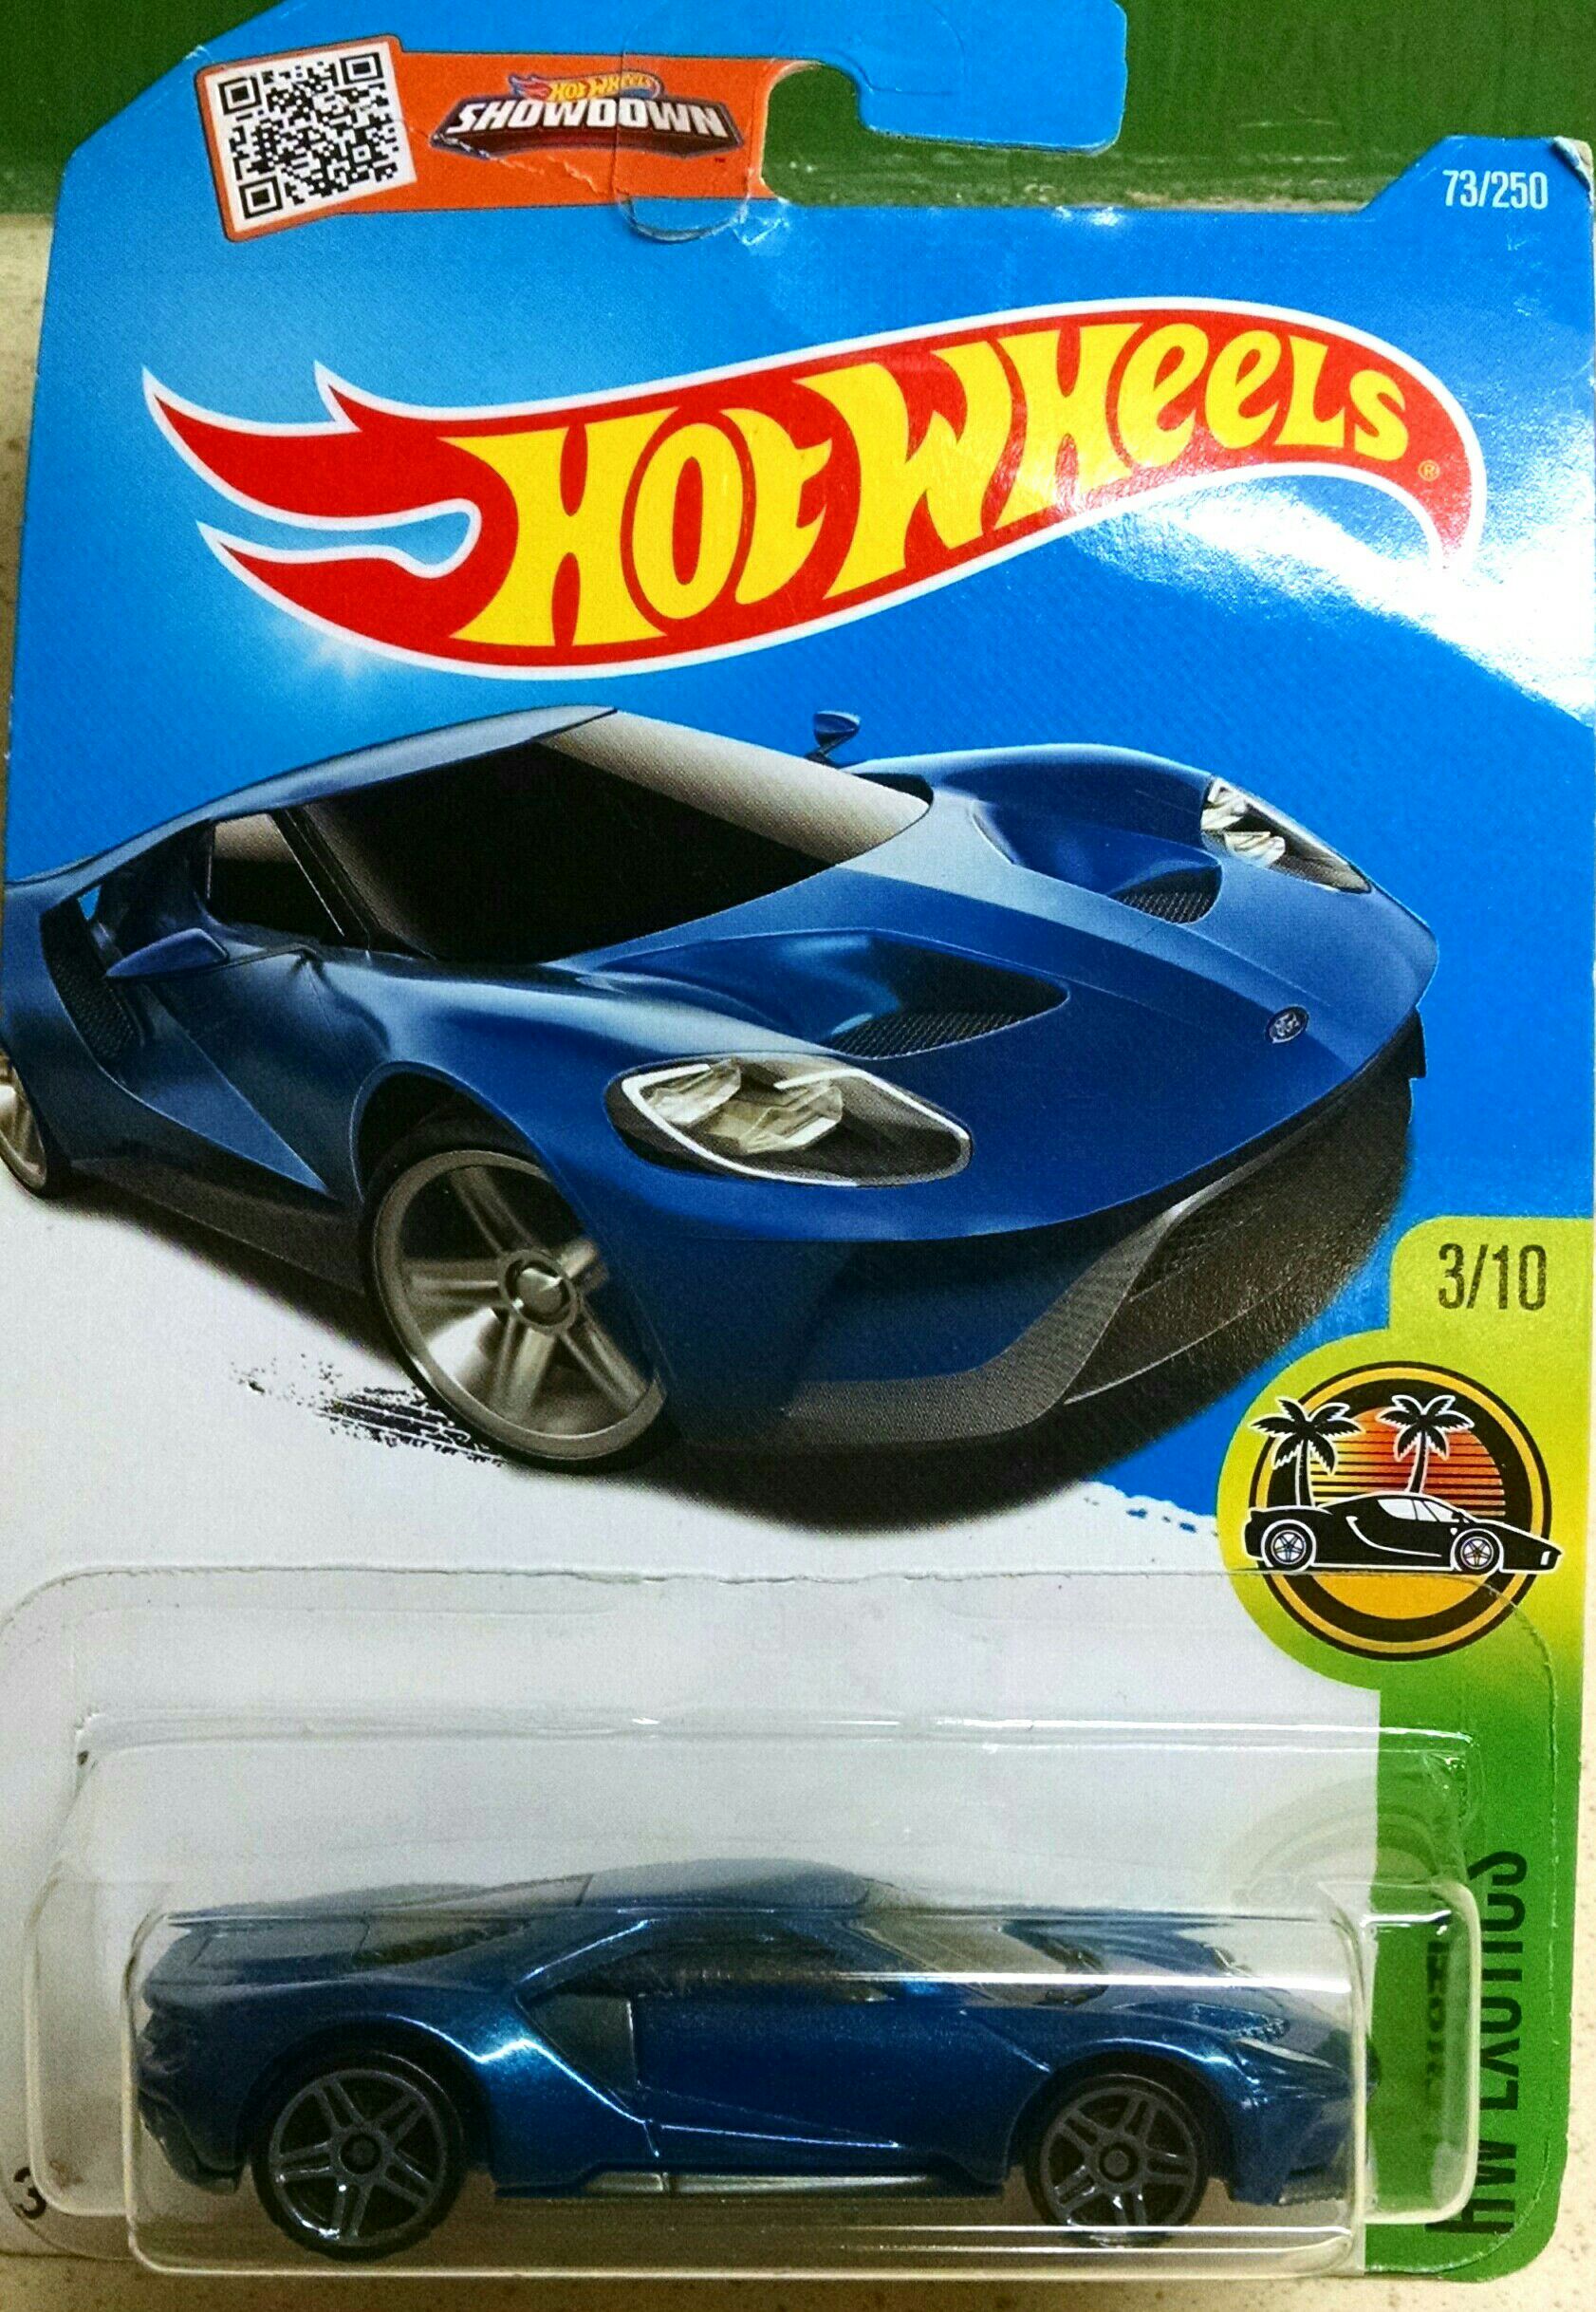 17 Ford GT - HW Exotics toy car collectible - Main Image 1